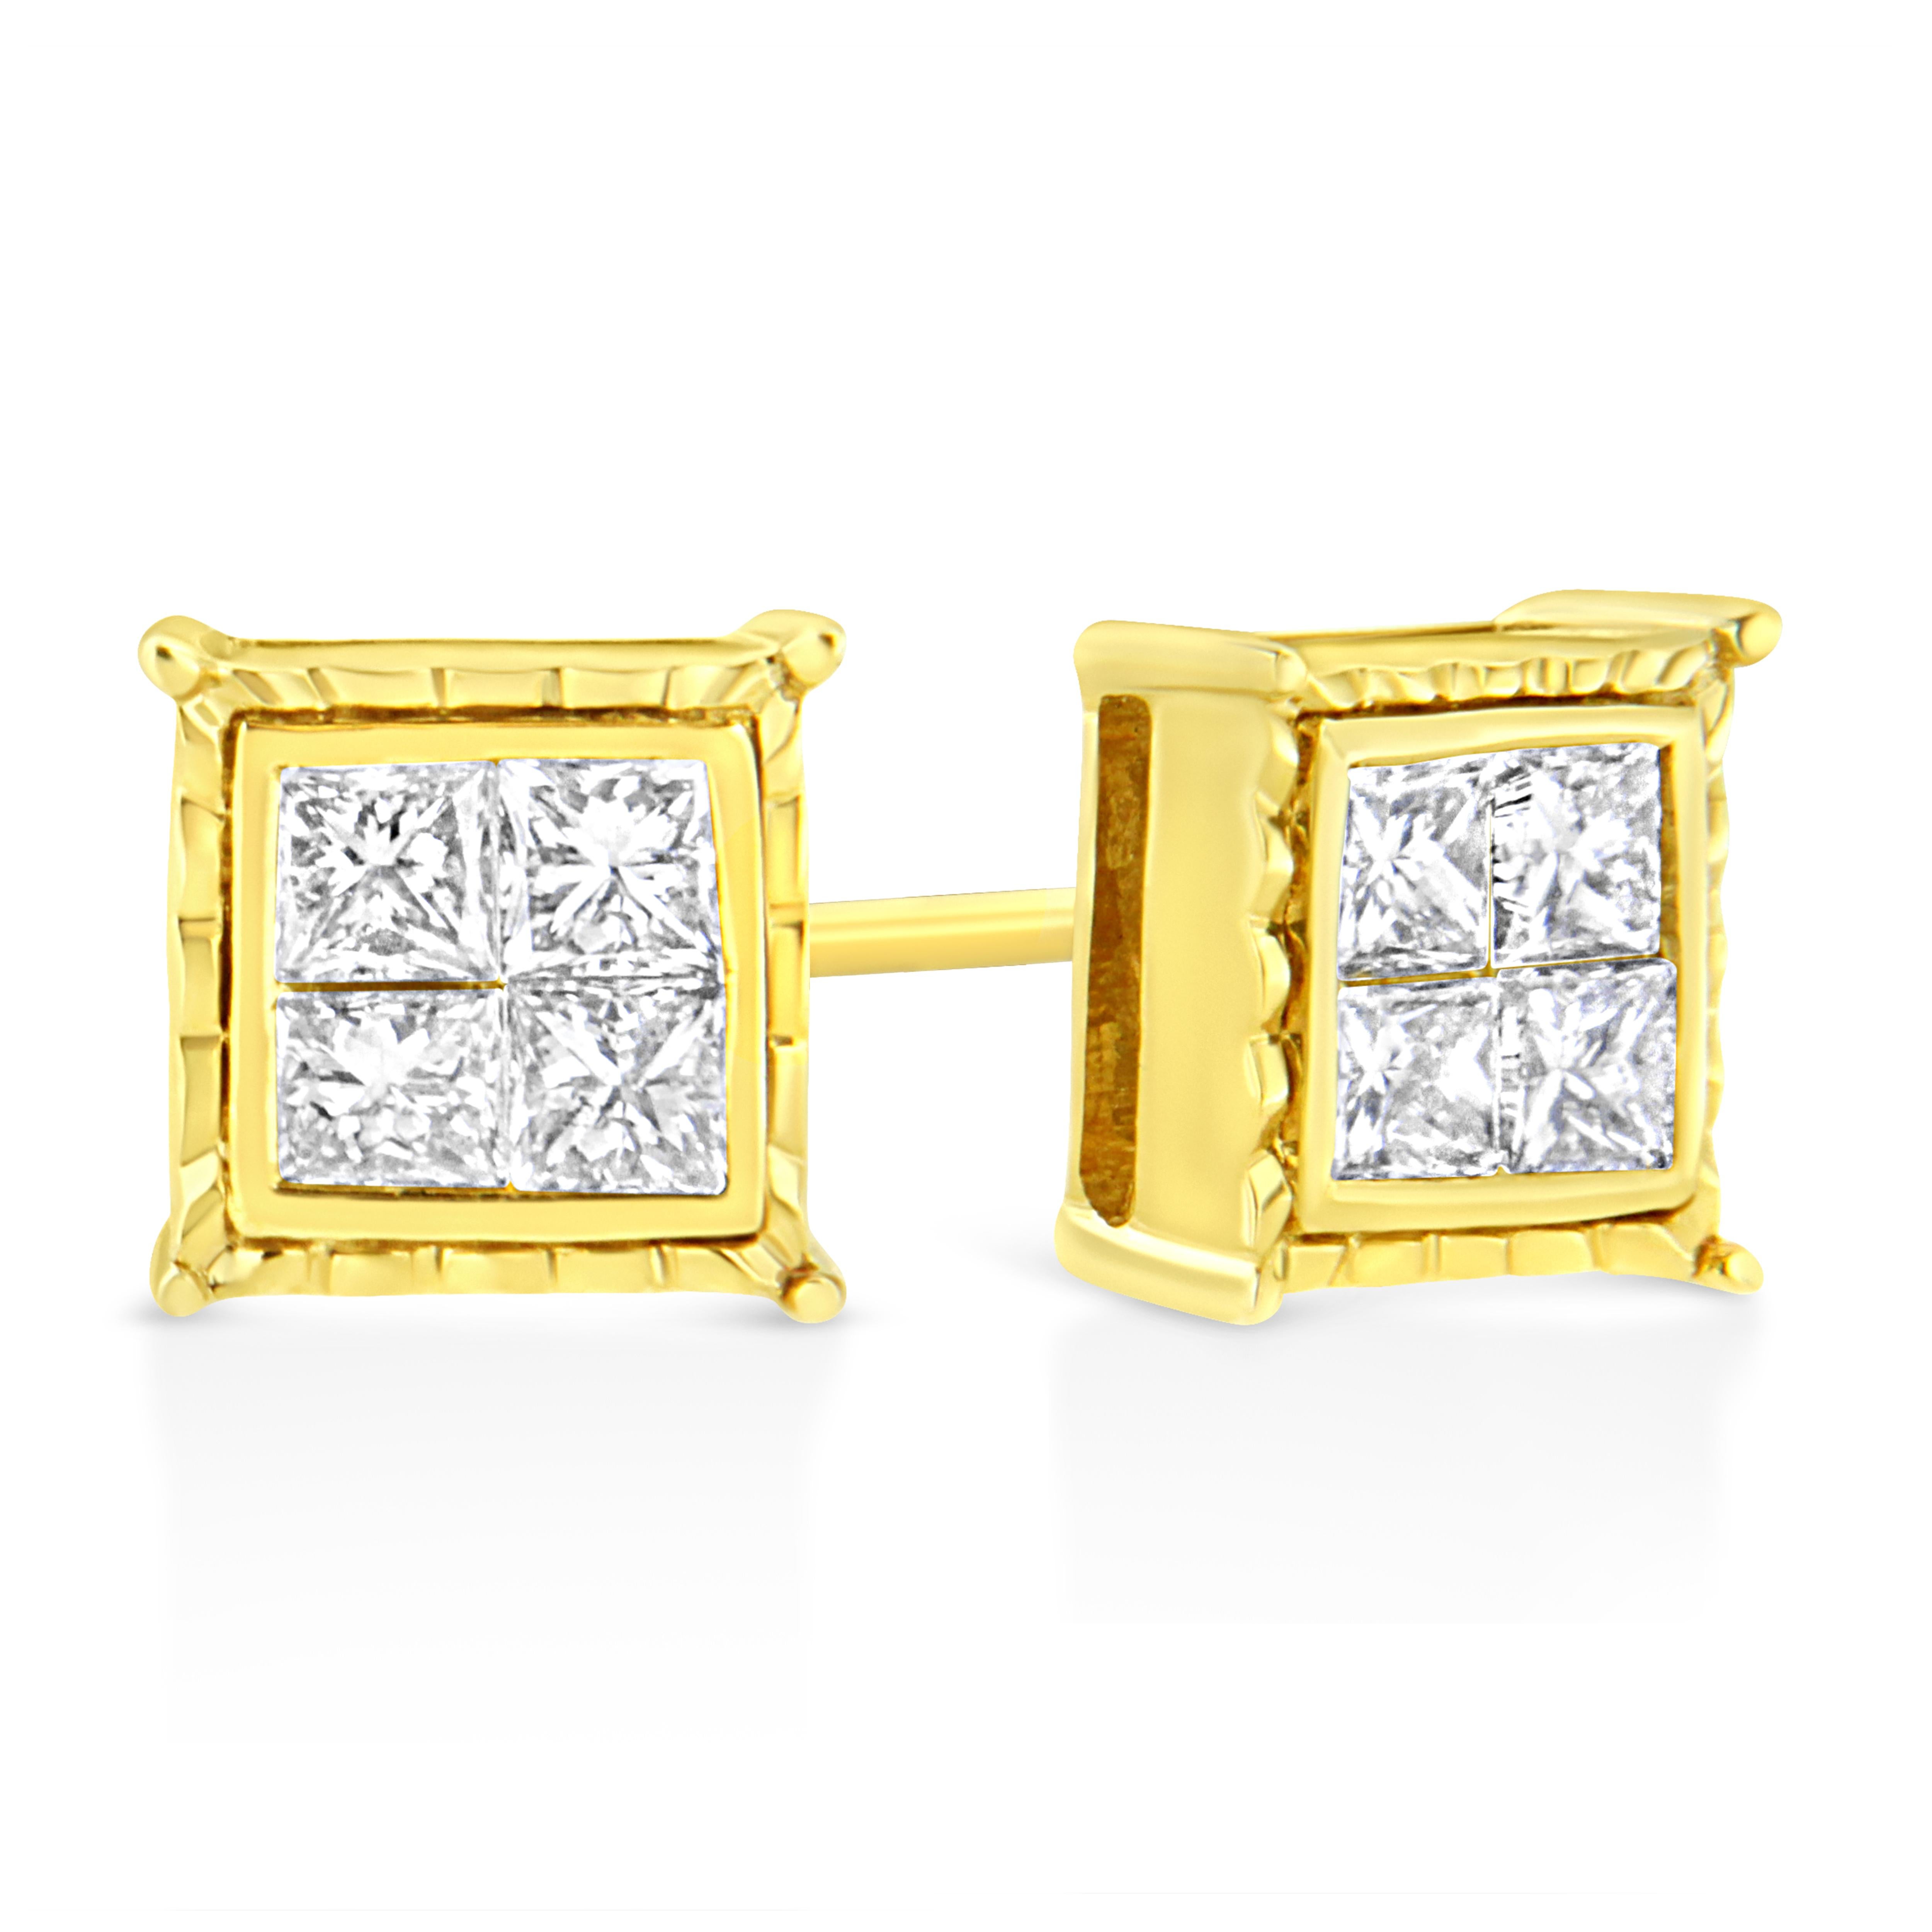 You will love these classic square stud earrings. A must have for any serious jewelry collection, these 14k yellow gold earrings boast an impressive 1 carat total weight of sparkling diamonds. Each square stud is designed with 4 princess-cut